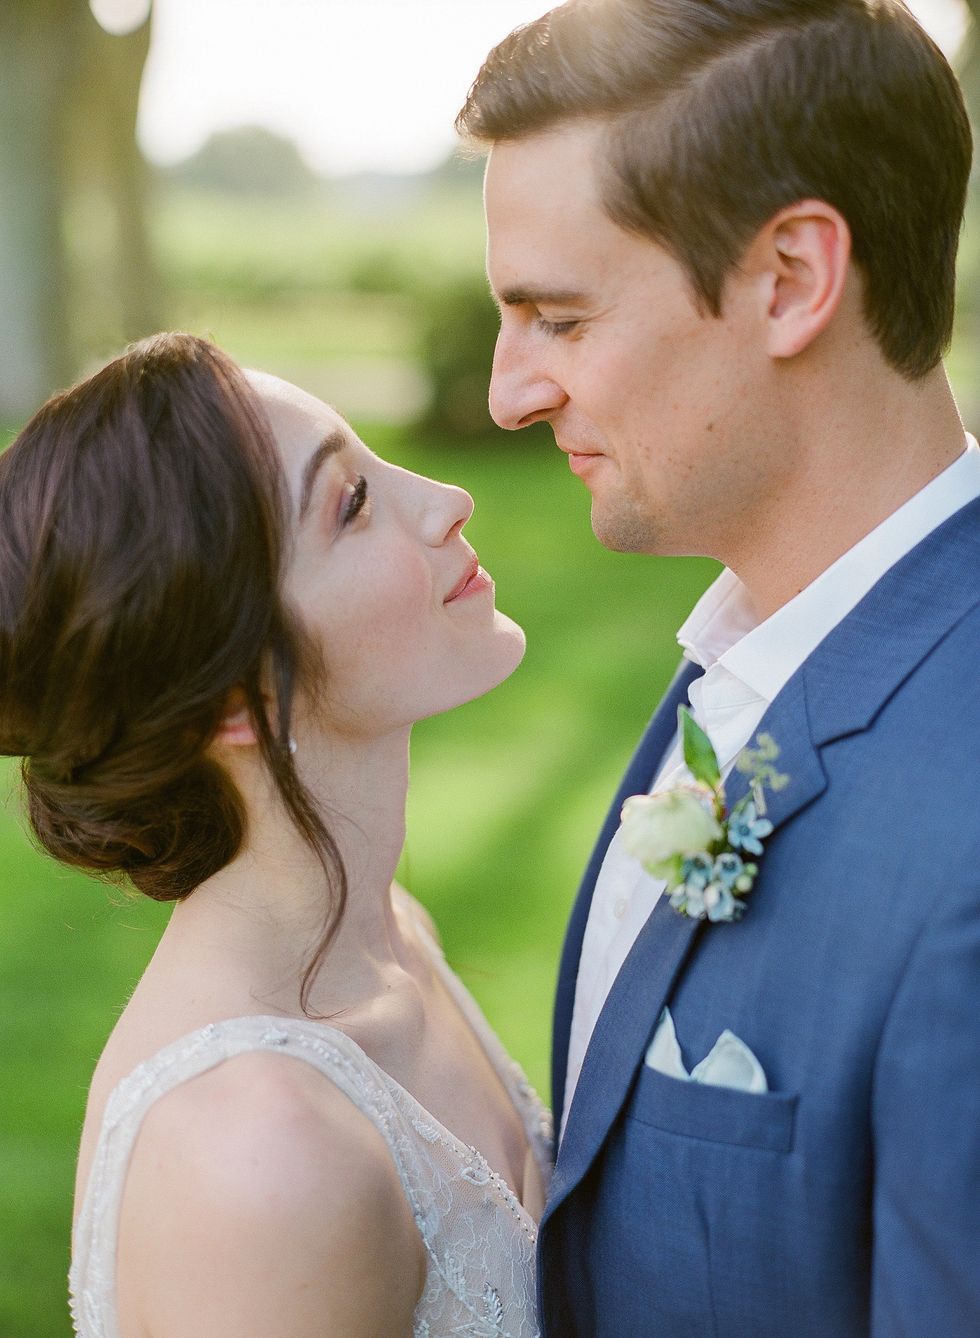 Photograph, Formal wear, Facial expression, Skin, Suit, Dress, Romance, Forehead, Ceremony, Gown, 